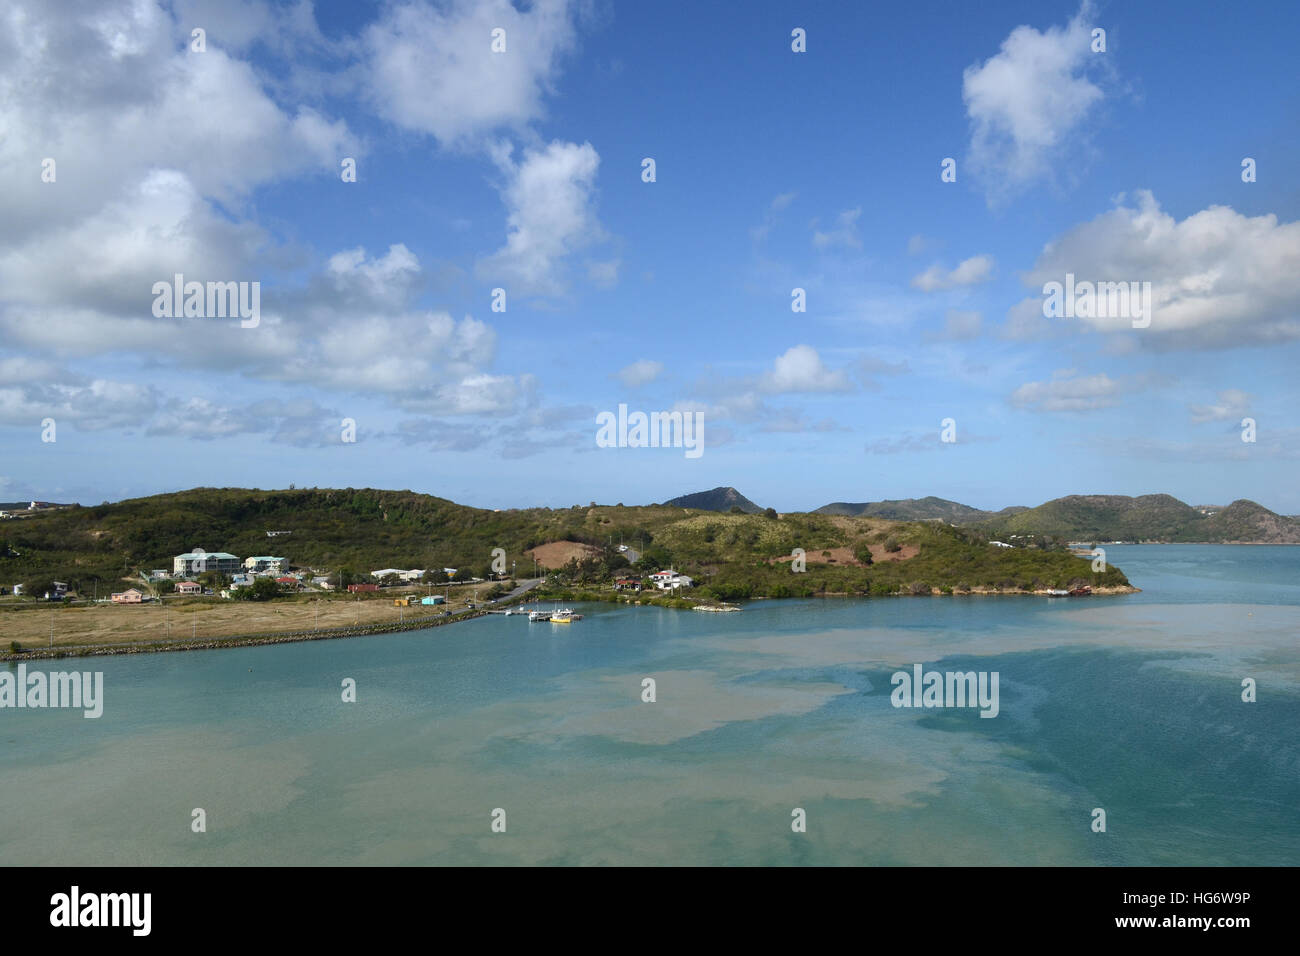 The island of St. Maarten in the Caribbean. Stock Photo